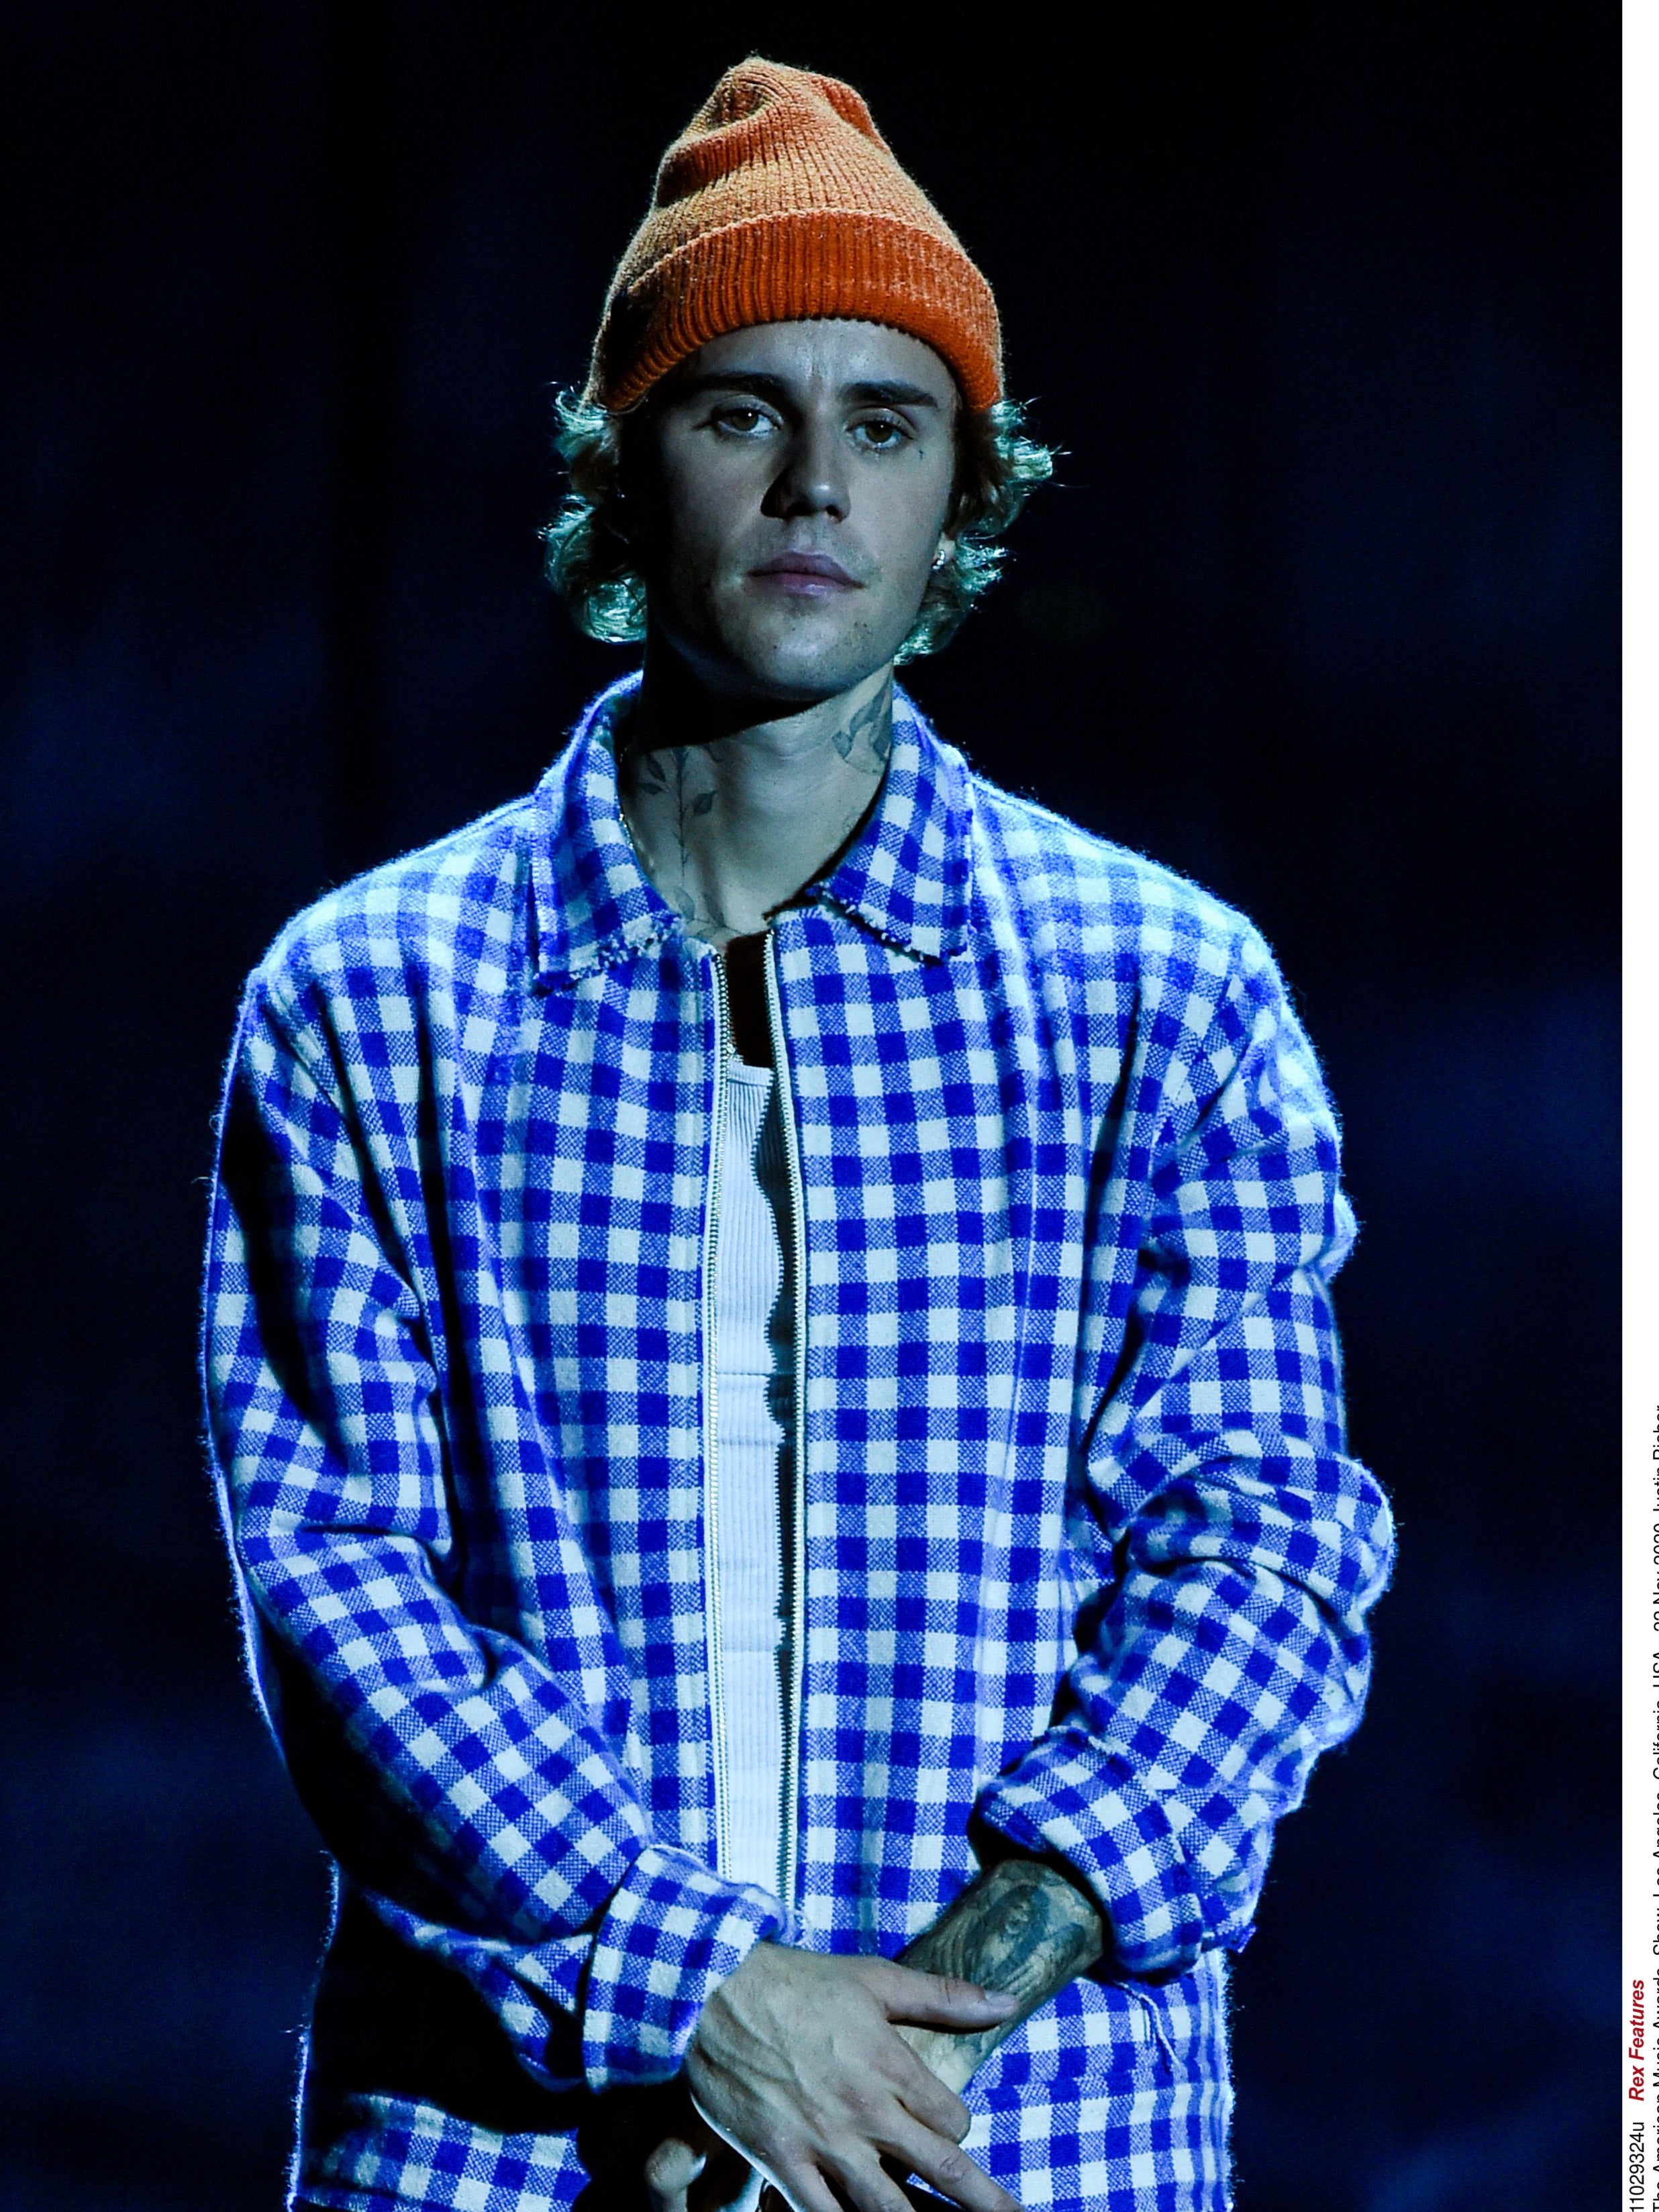 Justin Bieber says he is ‘humbled’ to work with the NHS choir